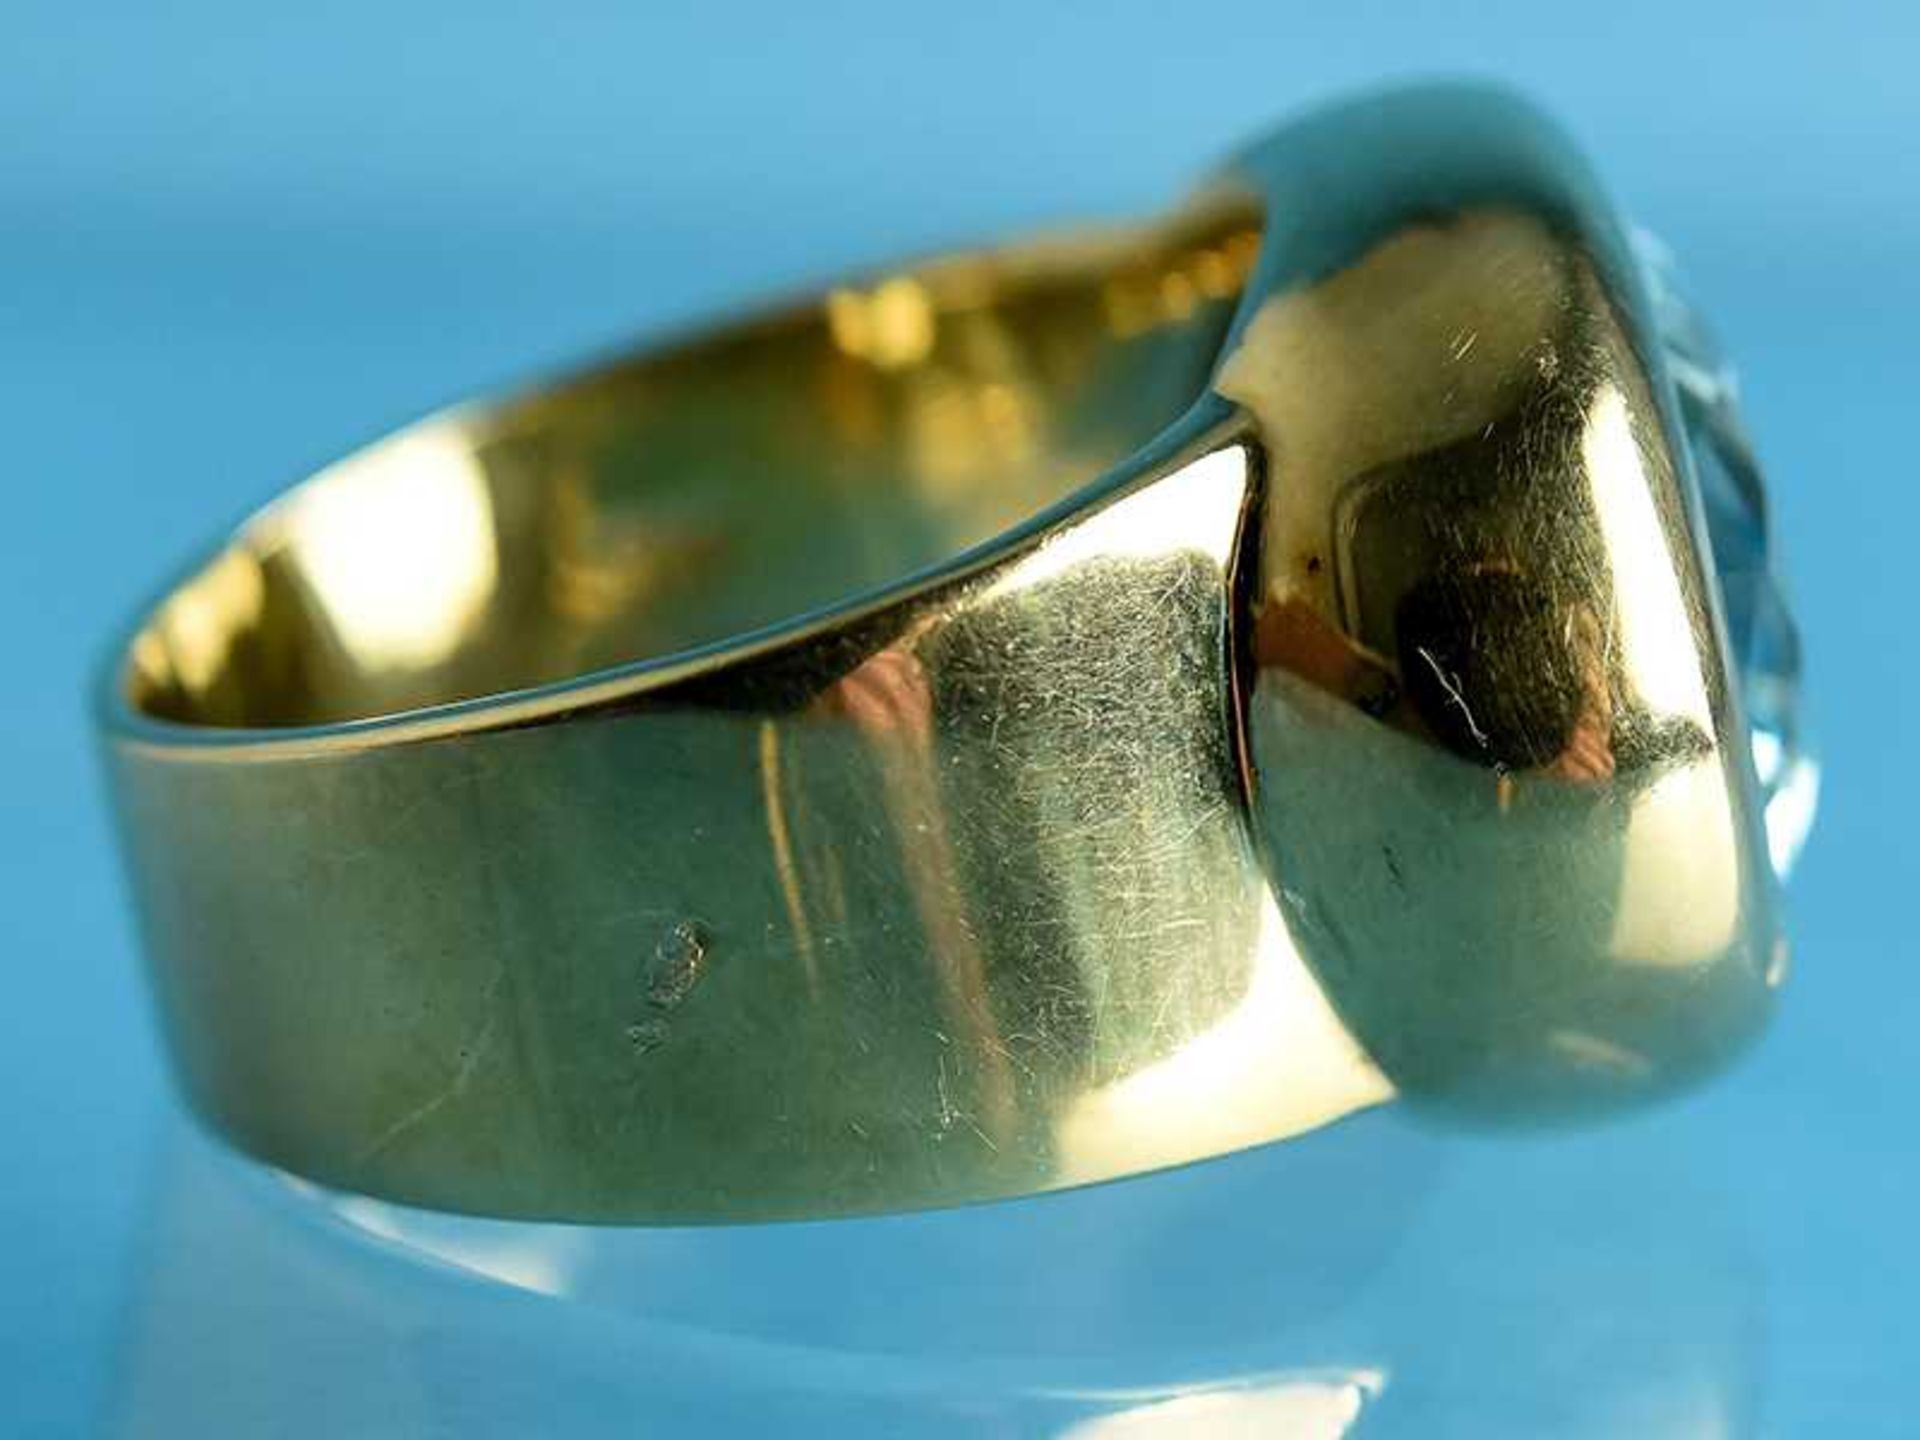 Massiver Bandring mit Aquamarin ca. 5,8 ct, Goldschmiedearbeit, 20. Jh. 585/- Gelbgold. - Image 2 of 10